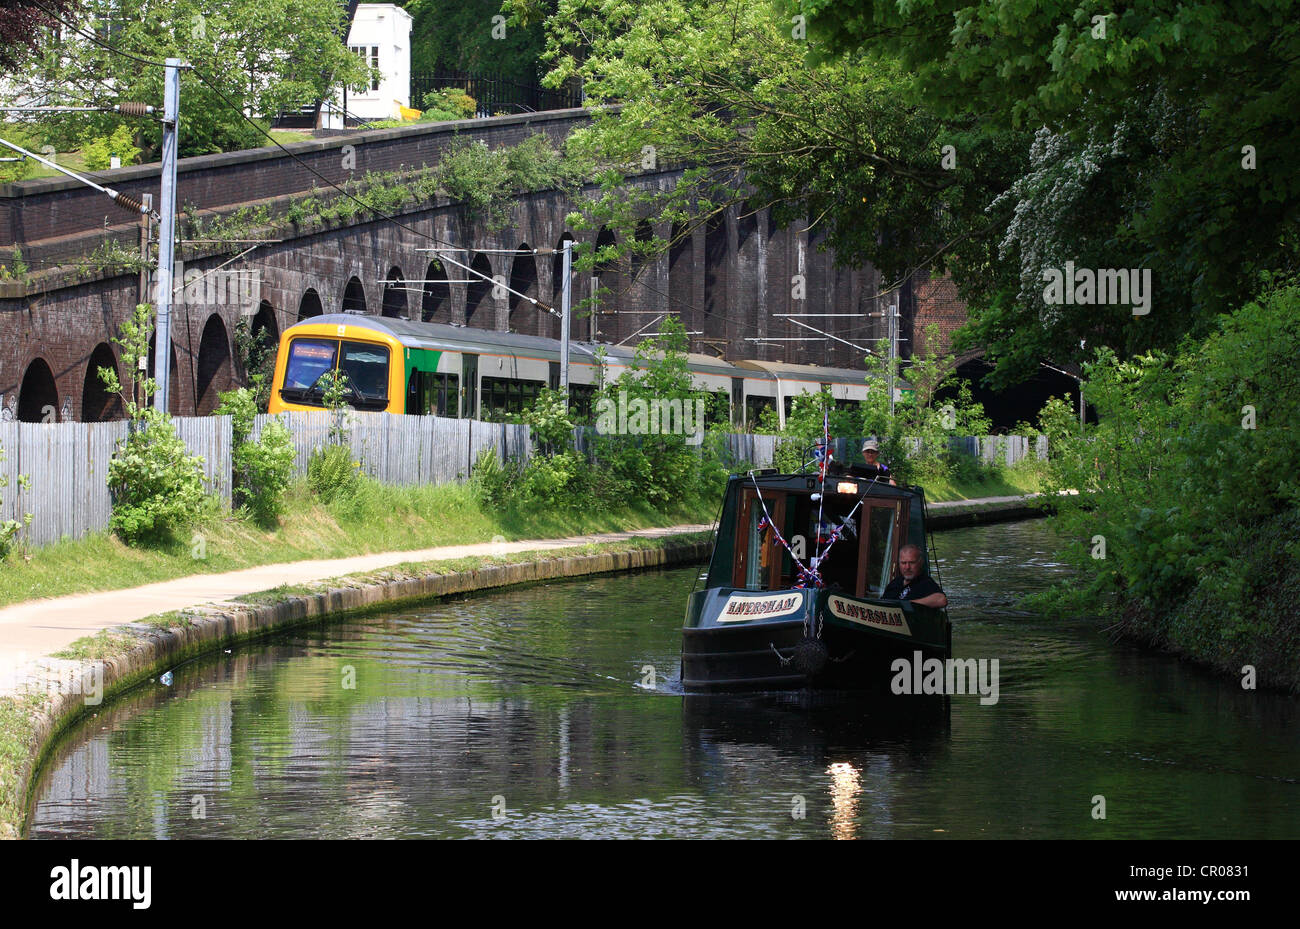 a canal boat traveling along a canal in Birmingham with a train traveling in the background Stock Photo